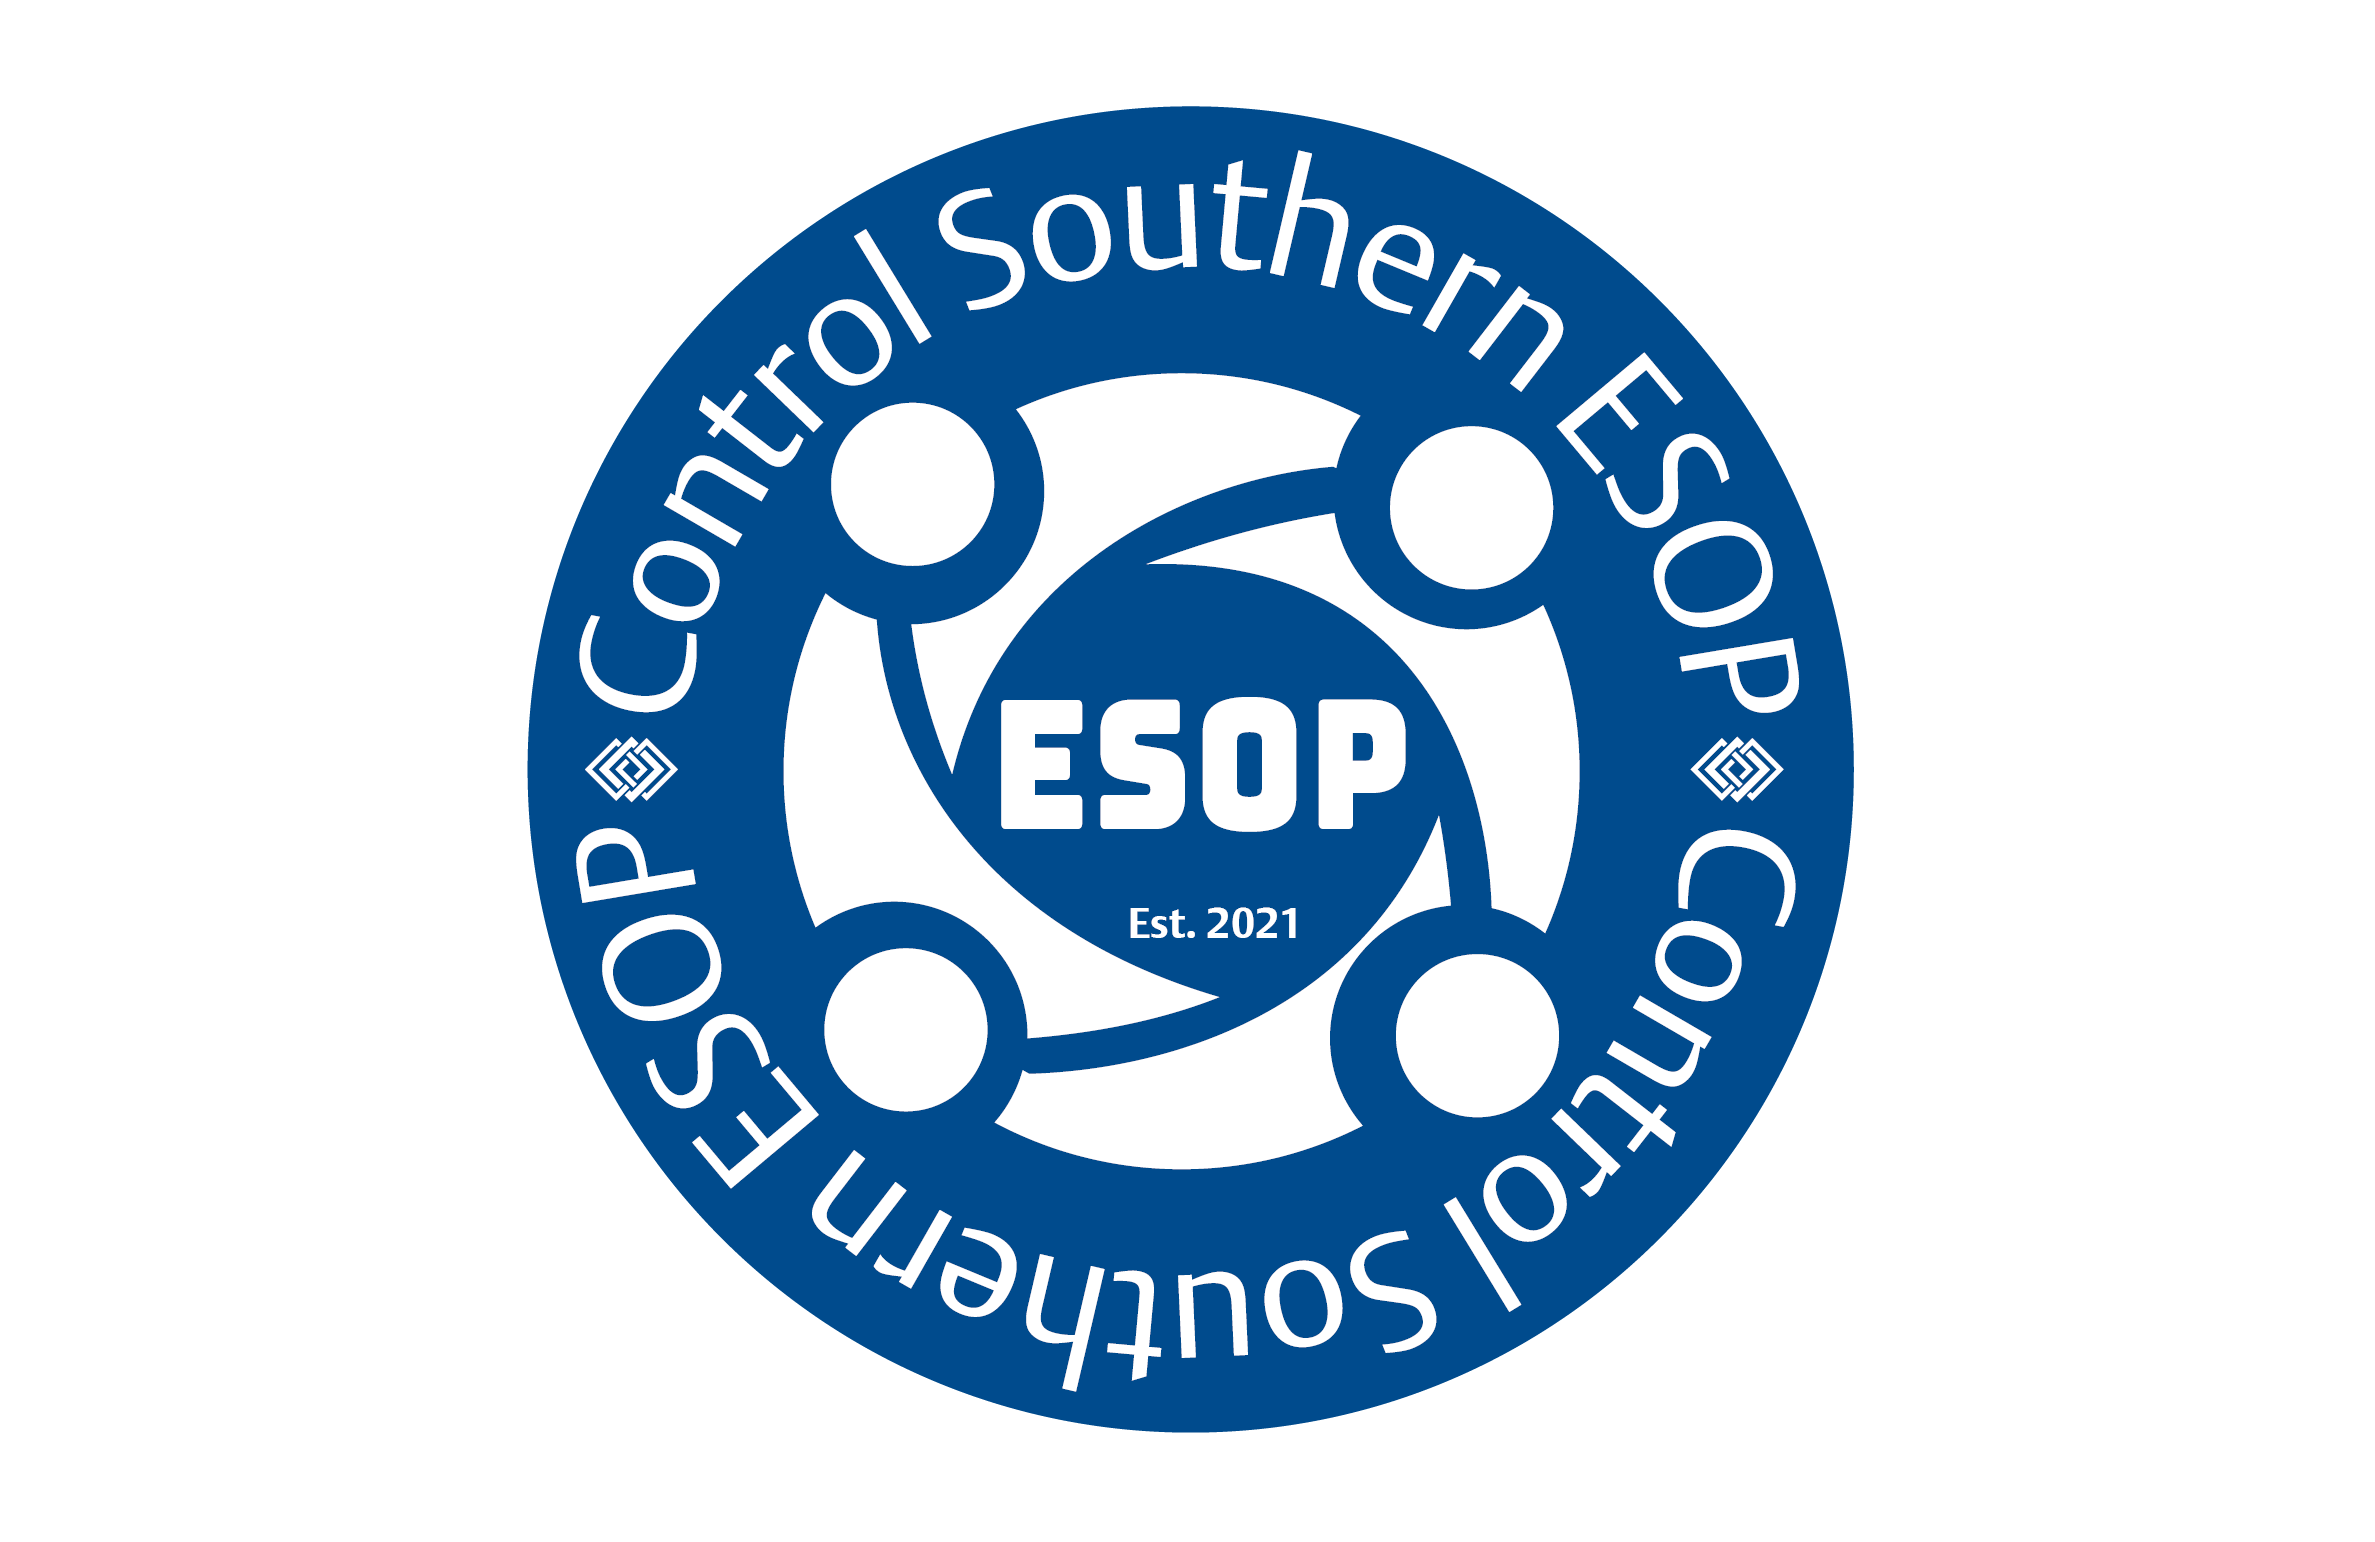 About Control Southern